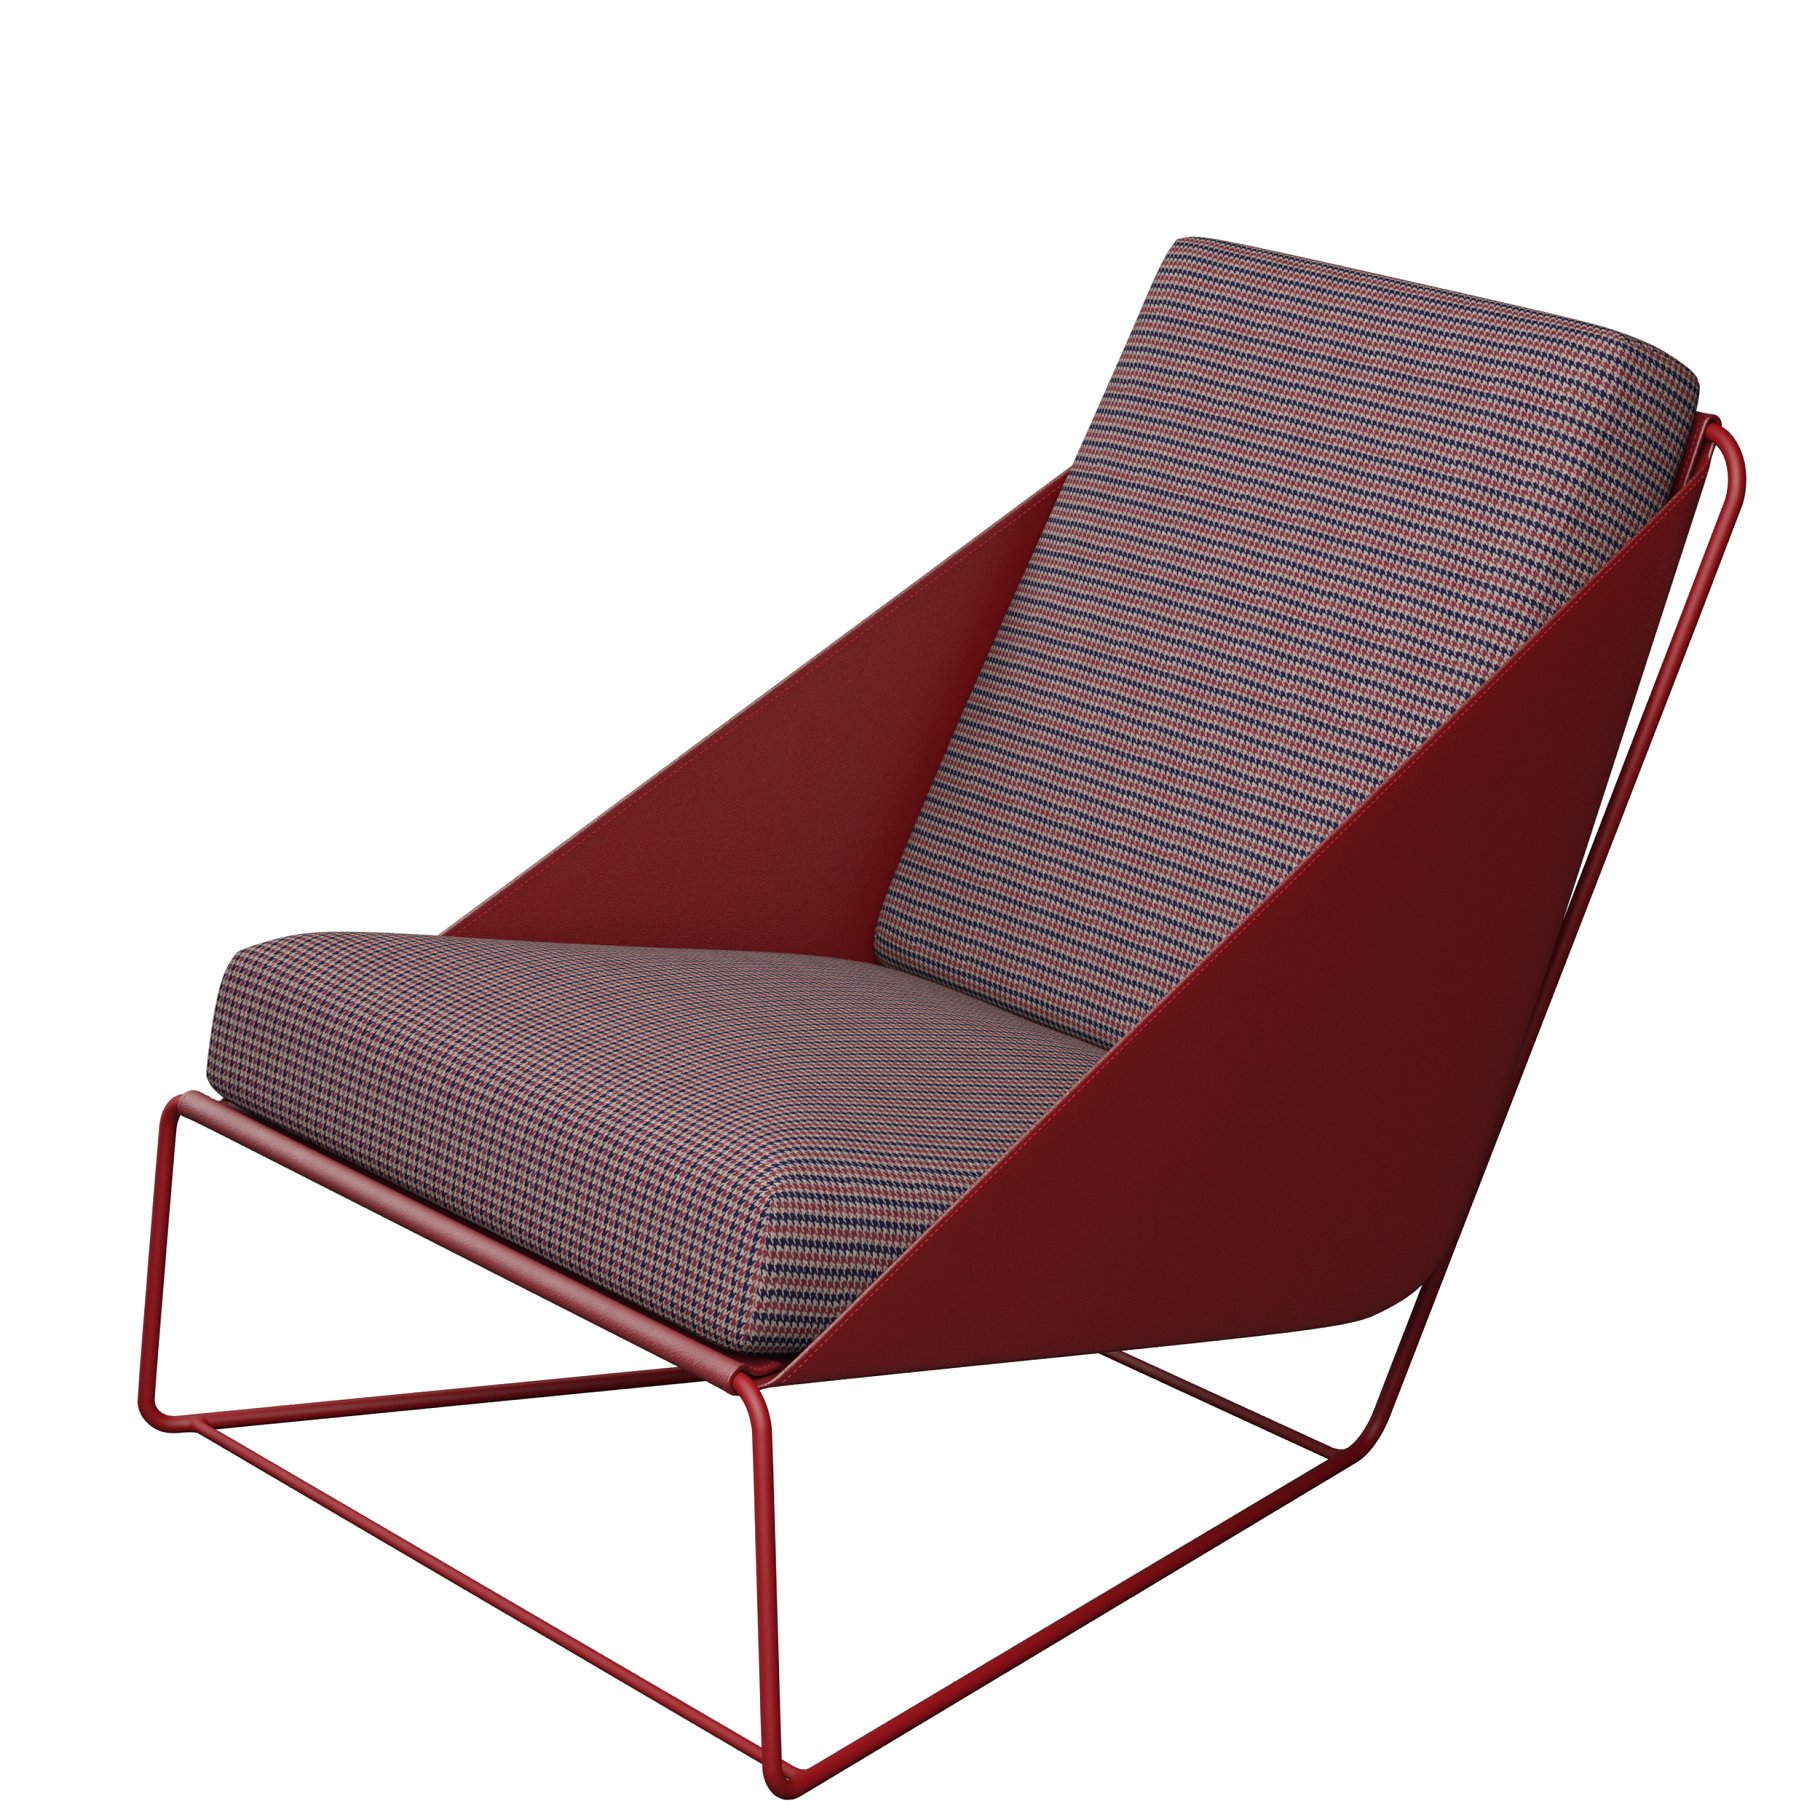 Rendering an irresistible 3d model of a red chair